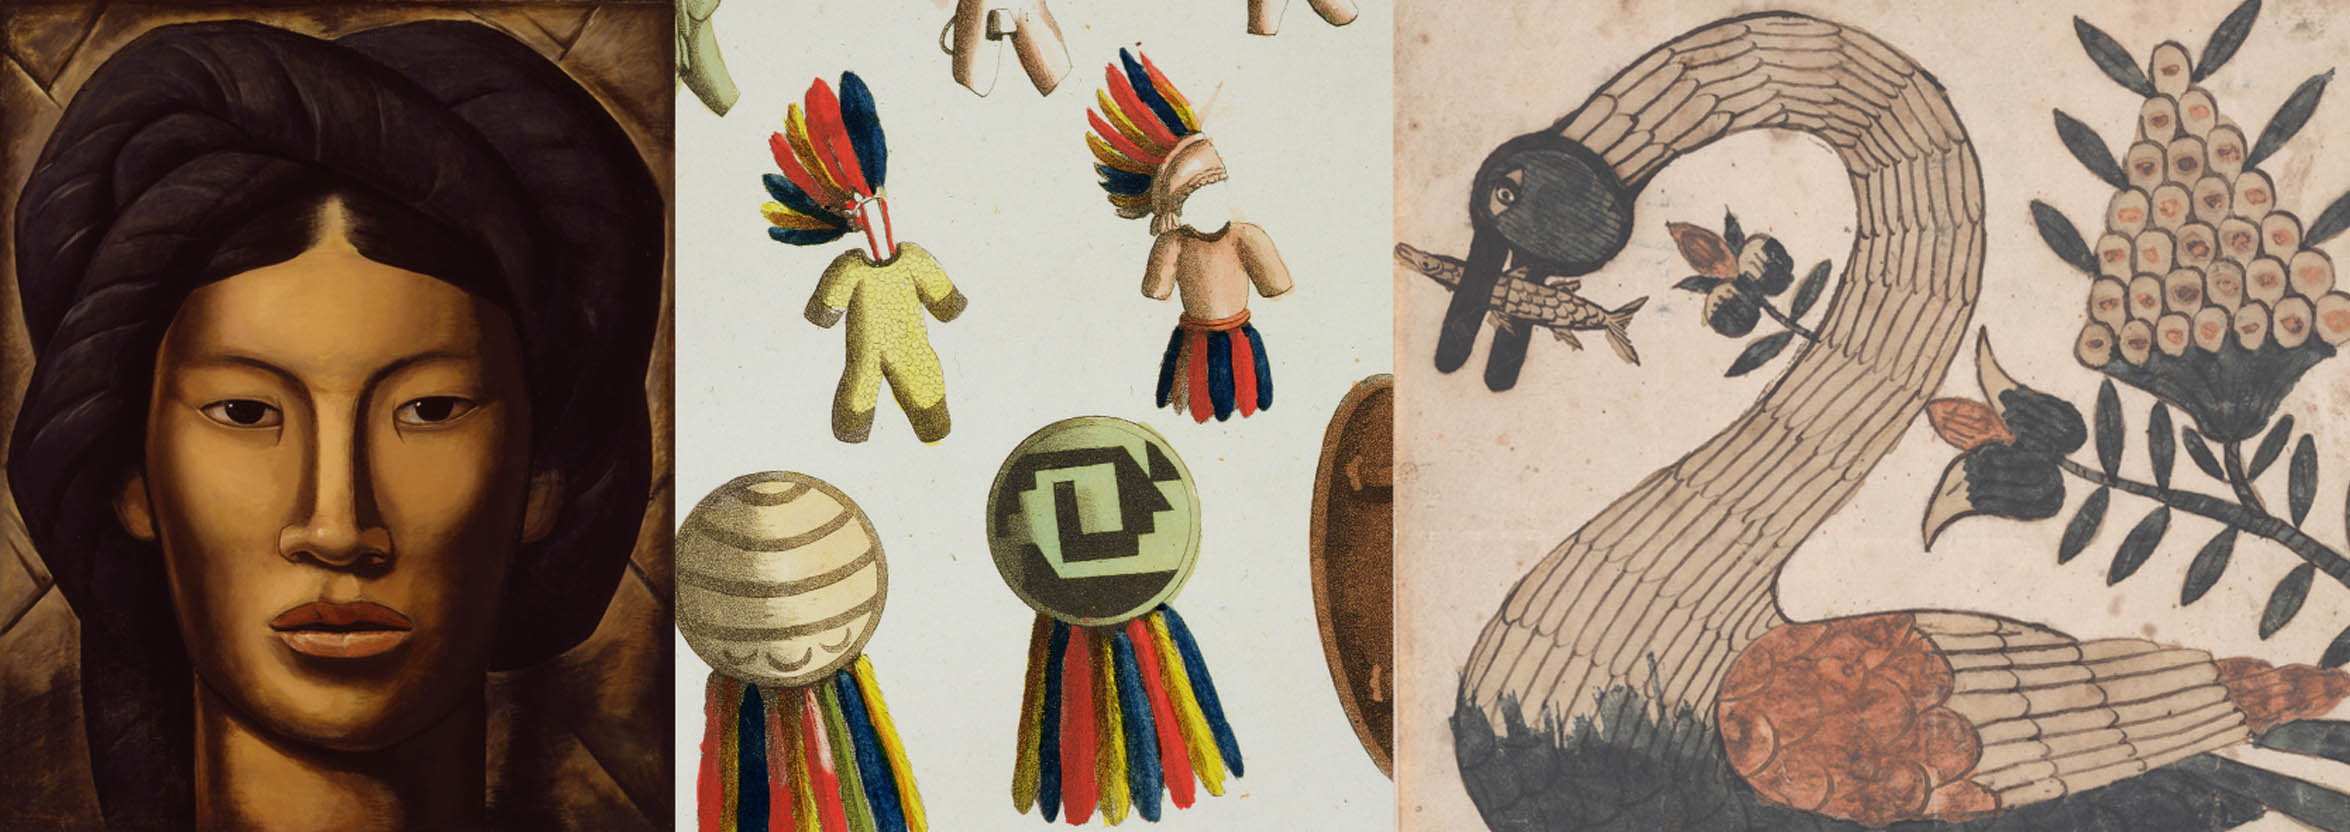 The Beauty and Significance of Folk Art 